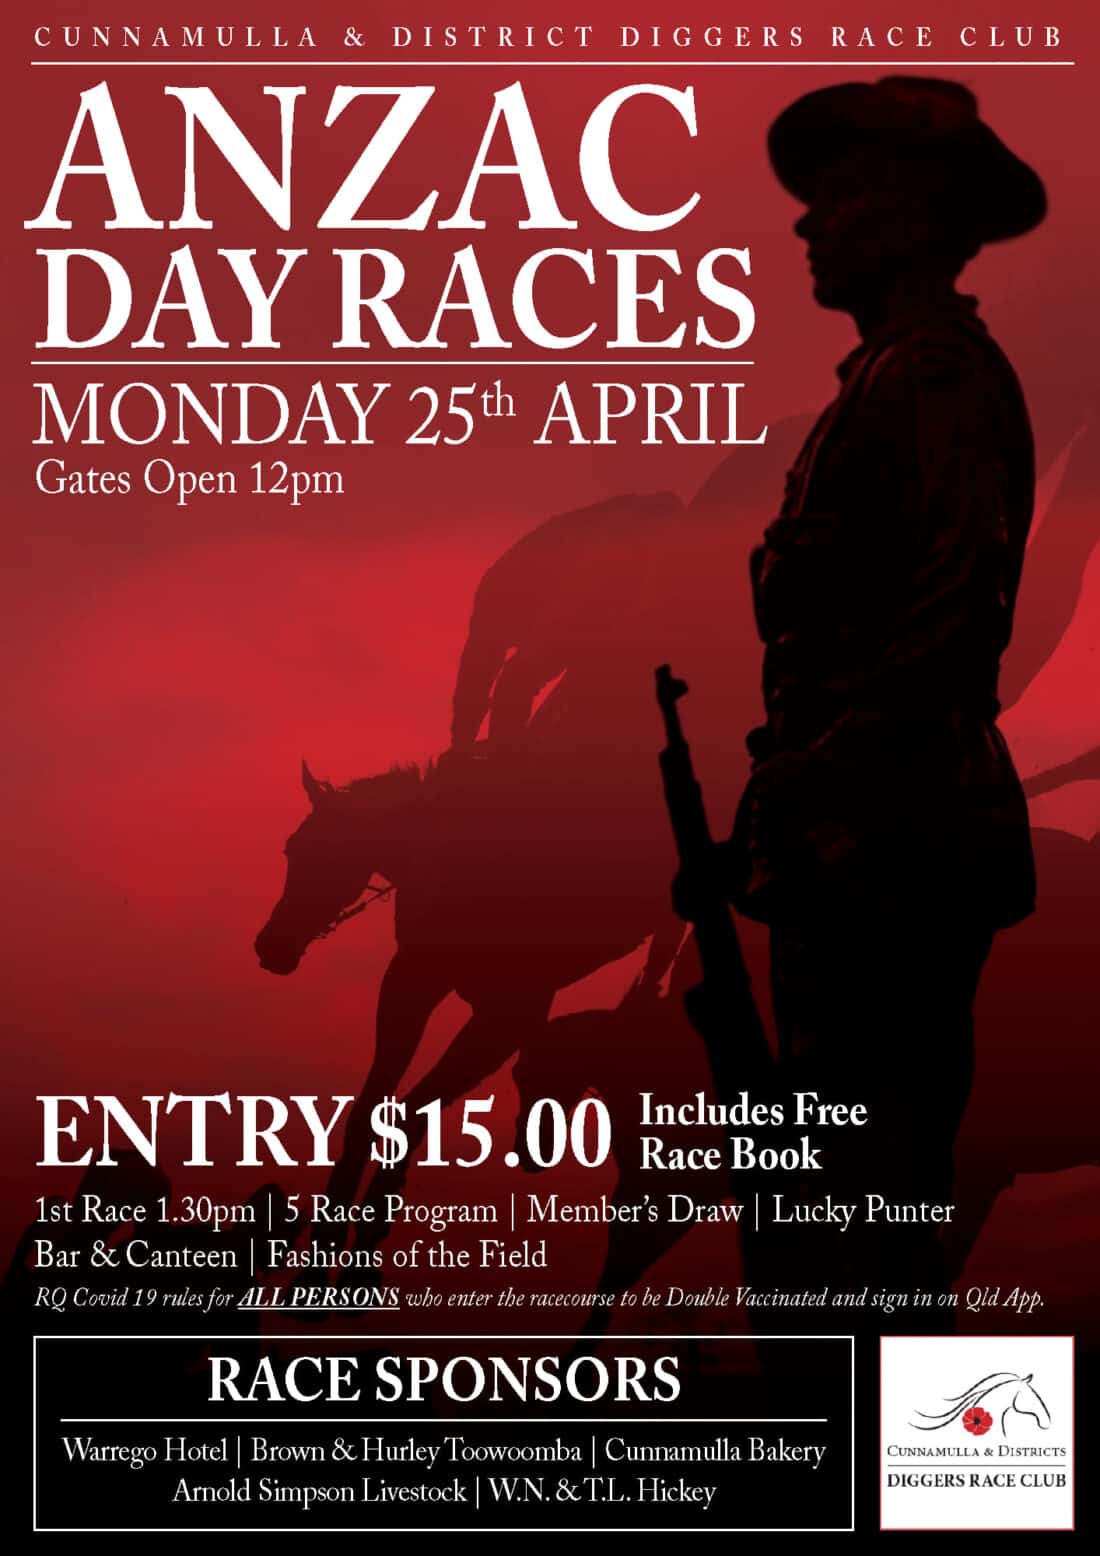 Cunnamulla Anzac Day Races